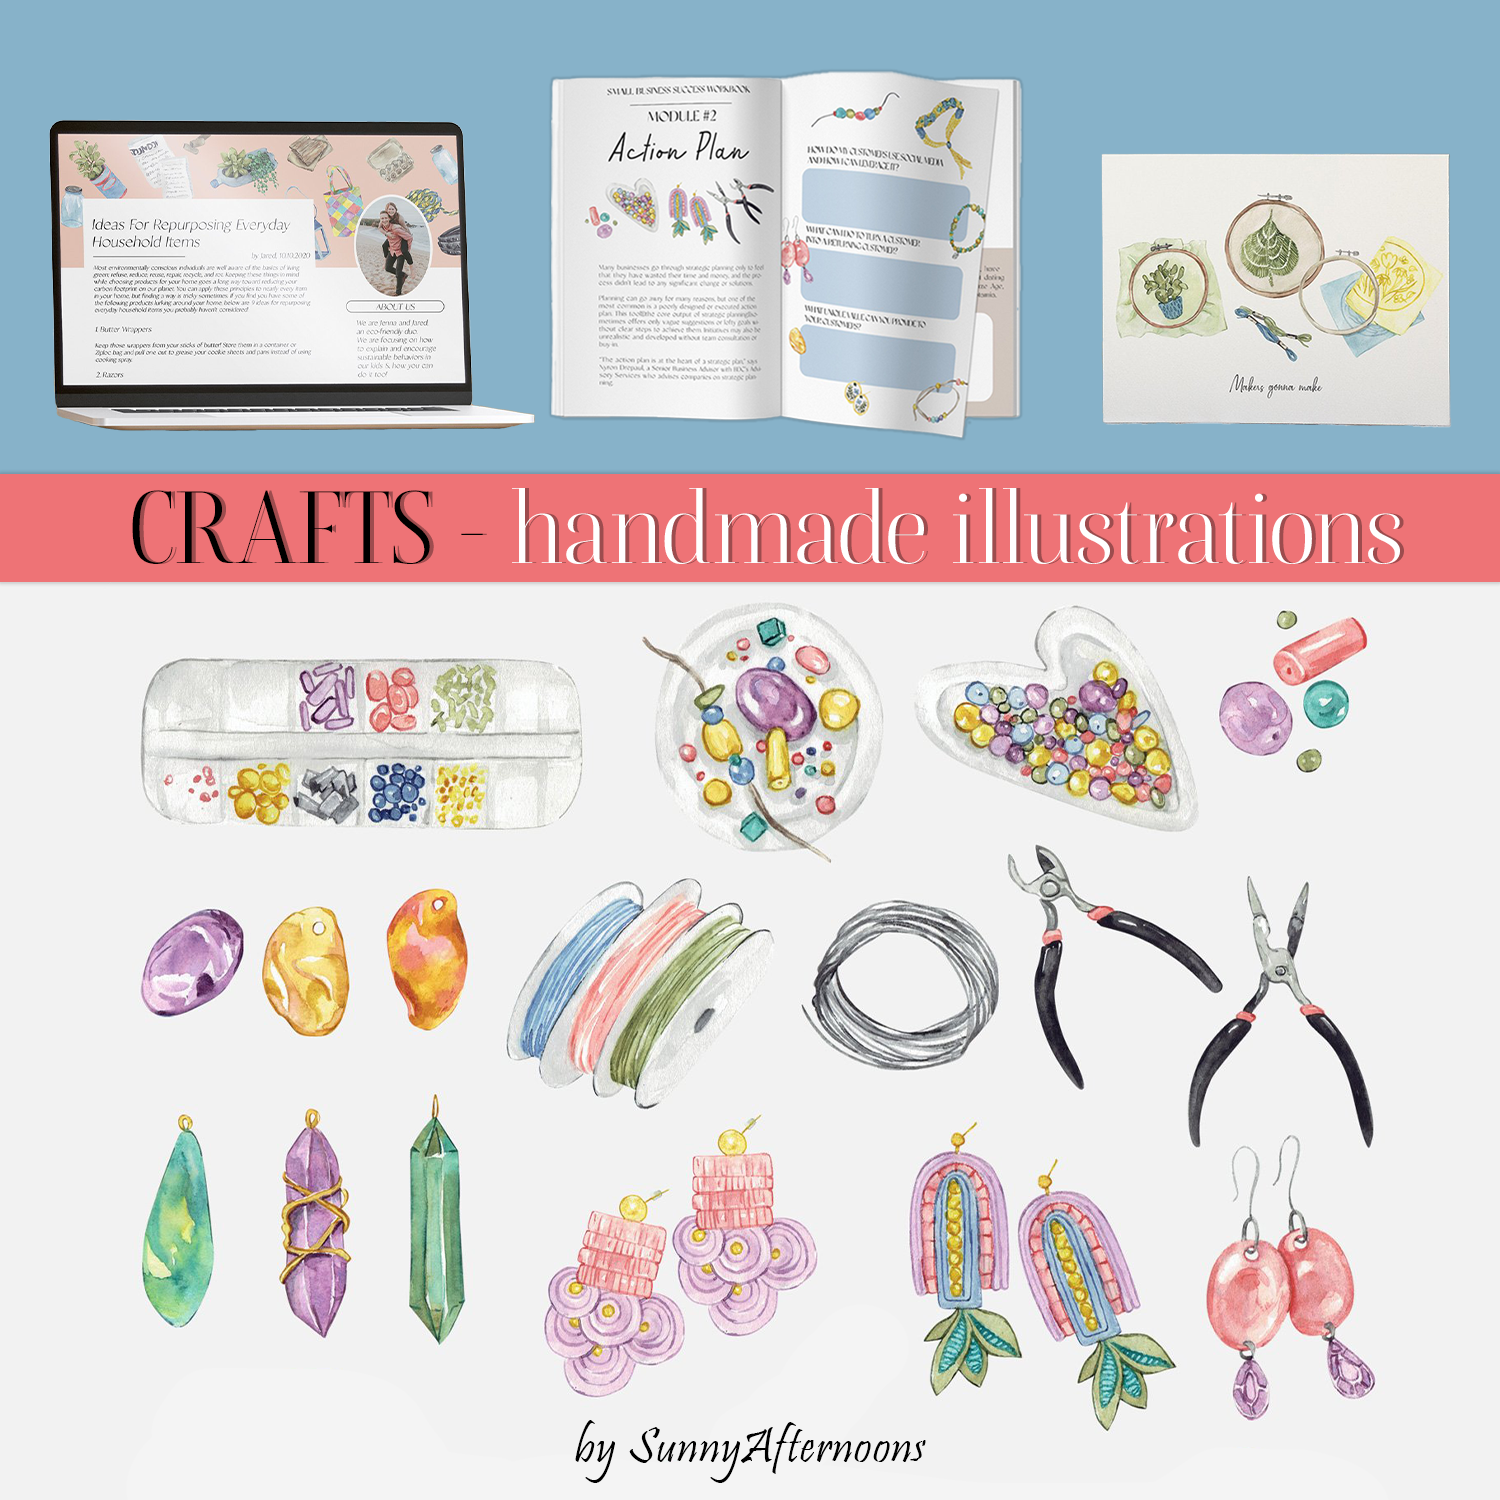 Preview crafts handmade illustrations.